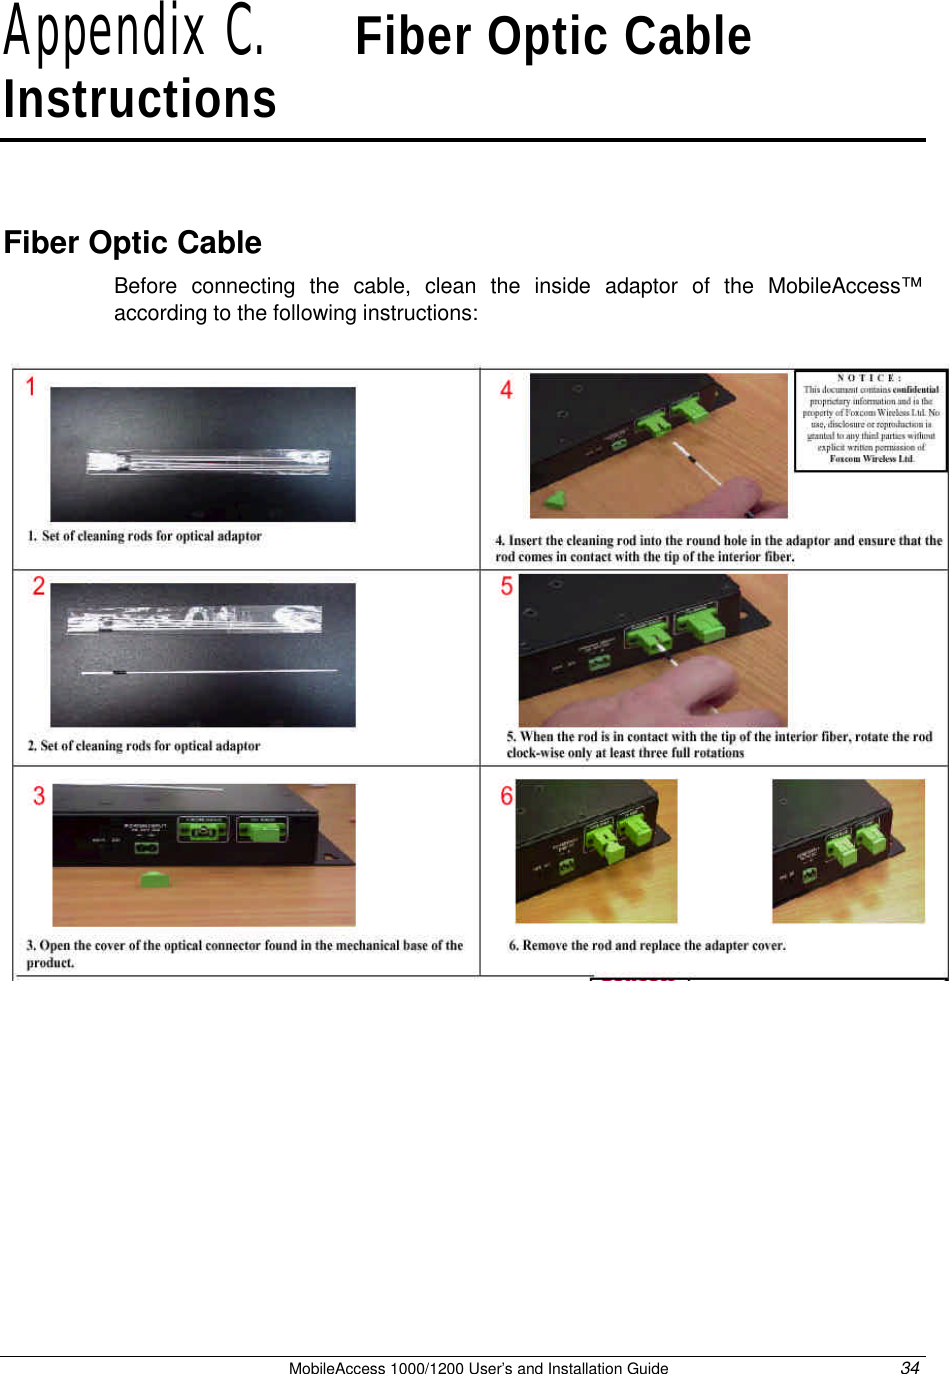   MobileAccess 1000/1200 User’s and Installation Guide 34 Appendix C.   Fiber Optic Cable Instructions Fiber Optic Cable Before connecting the cable, clean the inside adaptor of the MobileAccess™ according to the following instructions:  